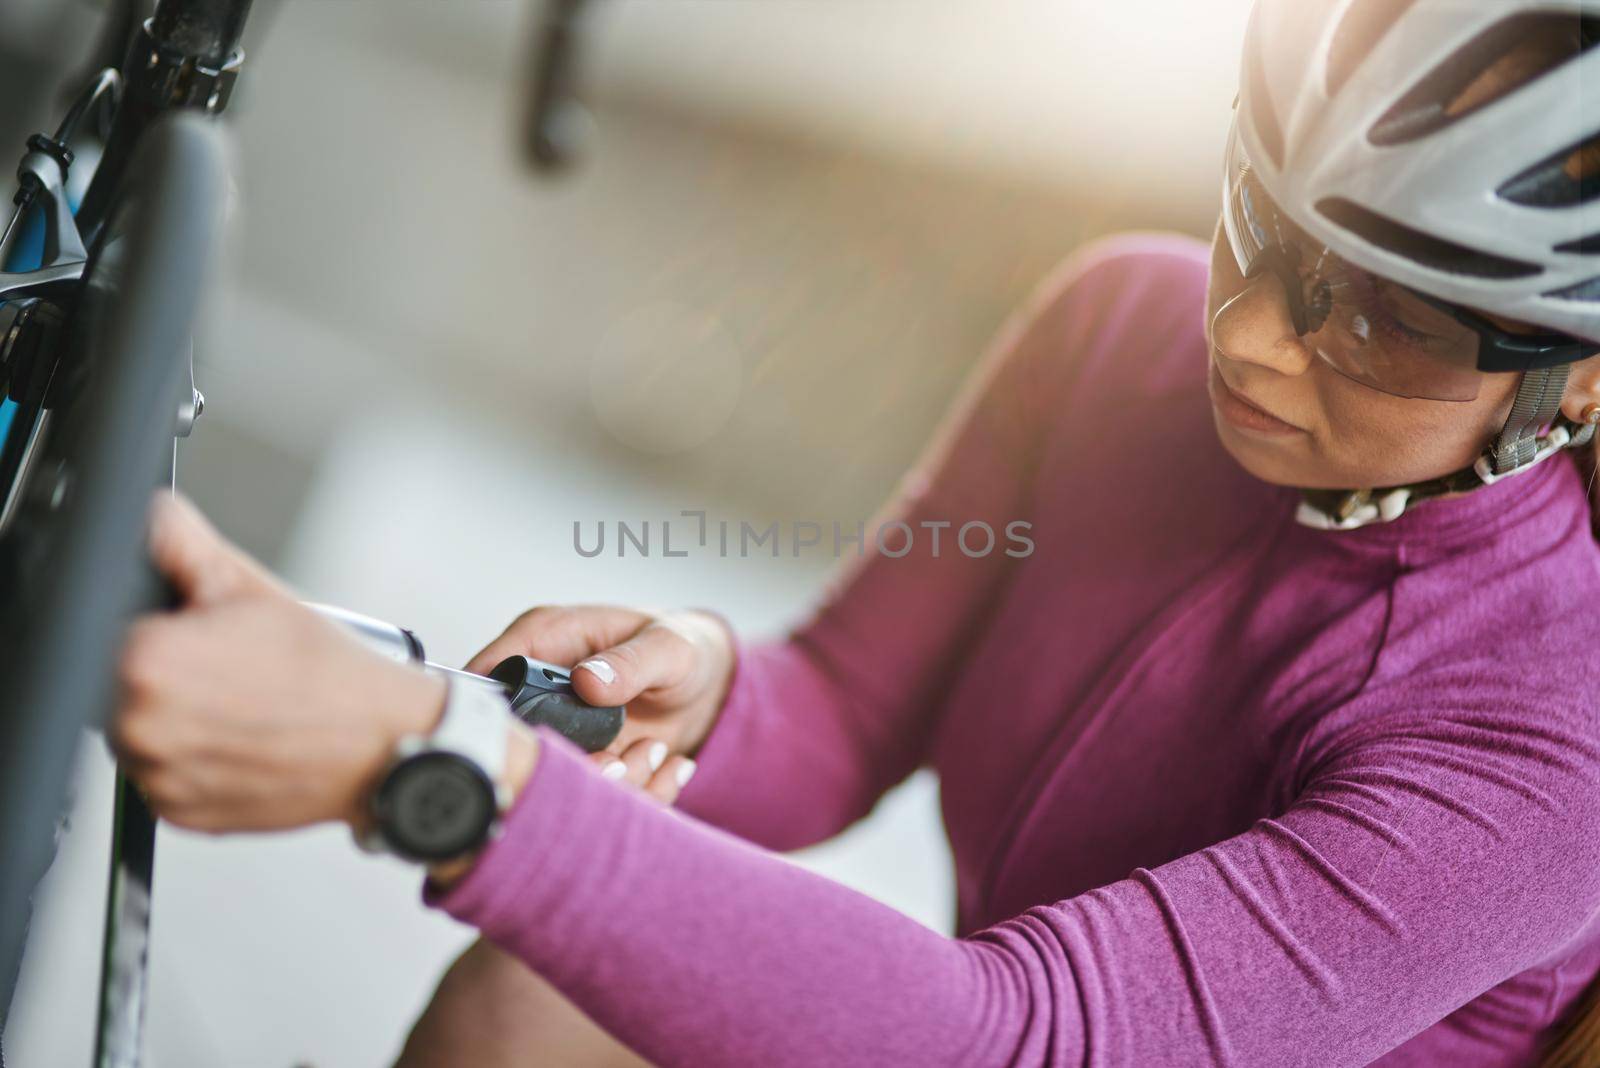 Professional female cyclist wearing protective helmet and glasses looking focused, using pump for inflating the tire of her bicycle, kneeling outdoors on a daytime. Transportation, sports concept